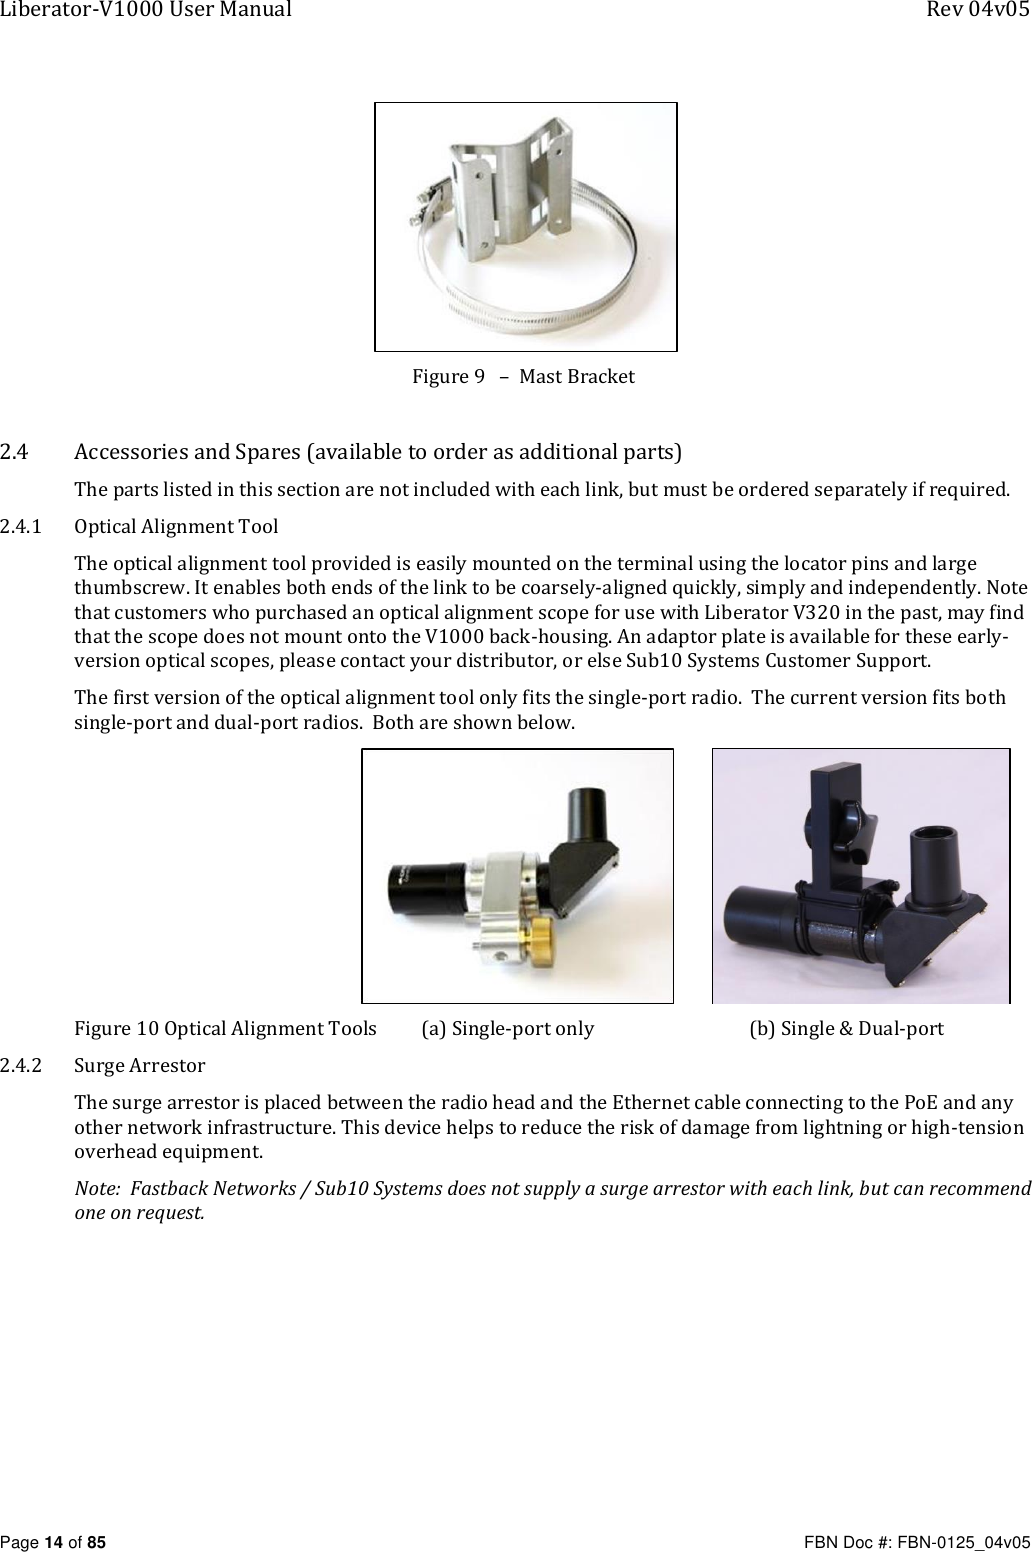 Liberator-V1000 User Manual  Rev 04v05     Page 14 of 85   FBN Doc #: FBN-0125_04v05  Figure 9   –  Mast Bracket    2.4 Accessories and Spares (available to order as additional parts) The parts listed in this section are not included with each link, but must be ordered separately if required. 2.4.1 Optical Alignment Tool The optical alignment tool provided is easily mounted on the terminal using the locator pins and large thumbscrew. It enables both ends of the link to be coarsely-aligned quickly, simply and independently. Note that customers who purchased an optical alignment scope for use with Liberator V320 in the past, may find that the scope does not mount onto the V1000 back-housing. An adaptor plate is available for these early-version optical scopes, please contact your distributor, or else Sub10 Systems Customer Support. The first version of the optical alignment tool only fits the single-port radio.  The current version fits both single-port and dual-port radios.  Both are shown below.                                                                  Figure 10 Optical Alignment Tools  (a) Single-port only  (b) Single &amp; Dual-port 2.4.2 Surge Arrestor The surge arrestor is placed between the radio head and the Ethernet cable connecting to the PoE and any other network infrastructure. This device helps to reduce the risk of damage from lightning or high-tension overhead equipment.   Note:  Fastback Networks / Sub10 Systems does not supply a surge arrestor with each link, but can recommend one on request. 